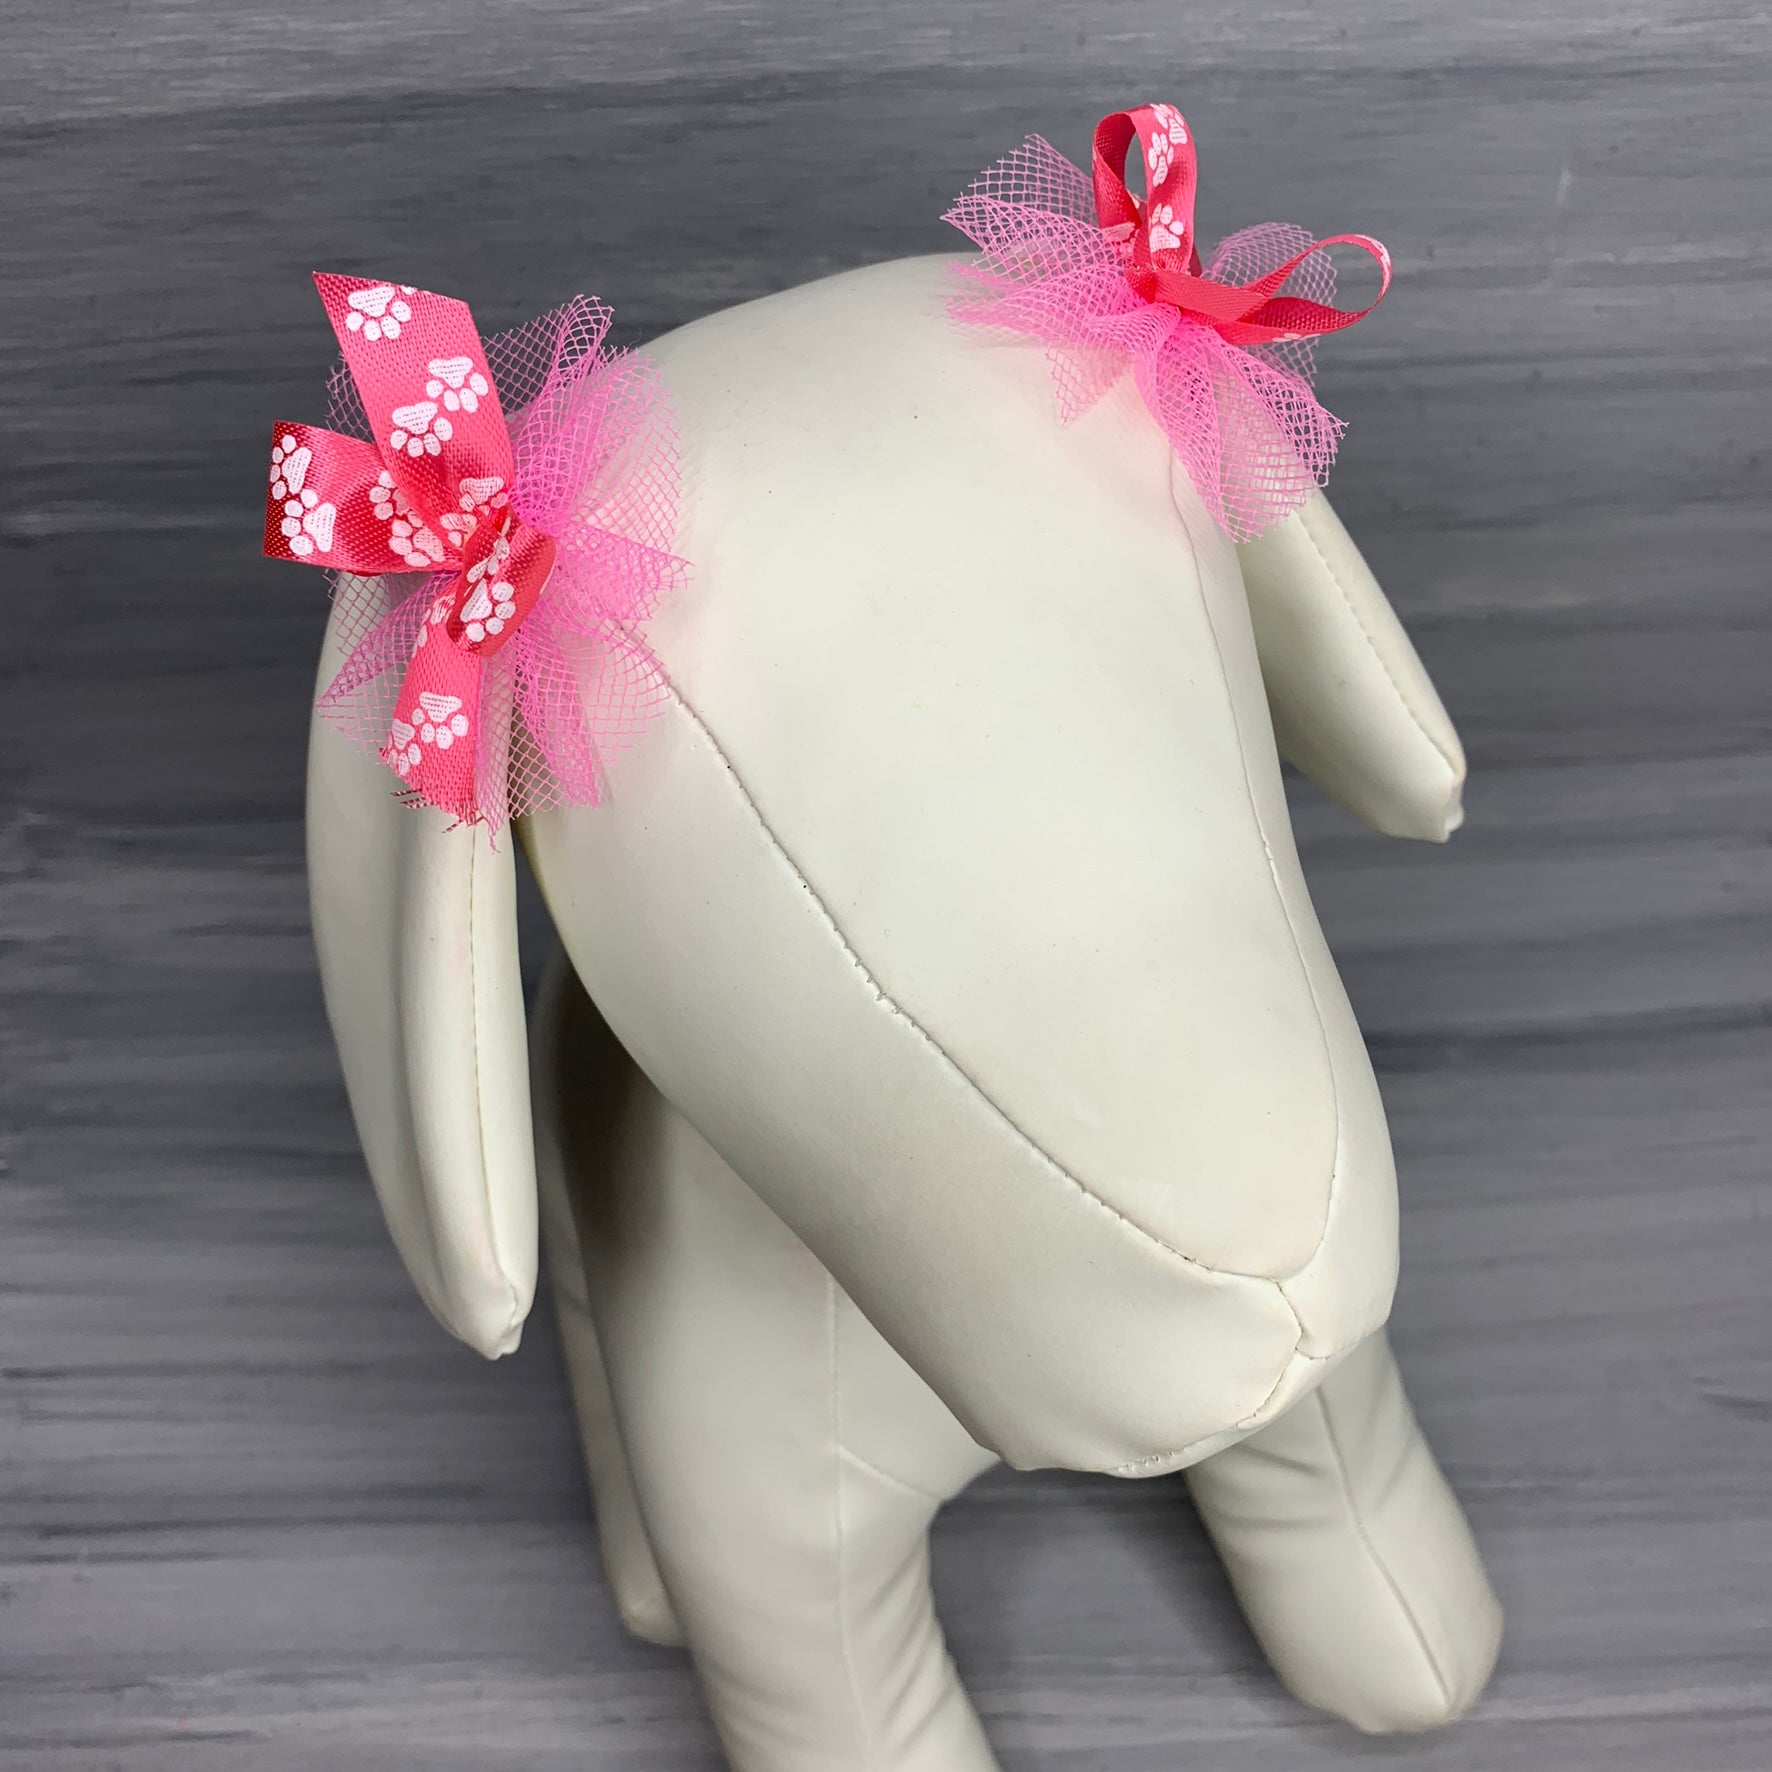 24 - Hot Pink Bow Collection - Medium 5/8 size – Bardel Bows